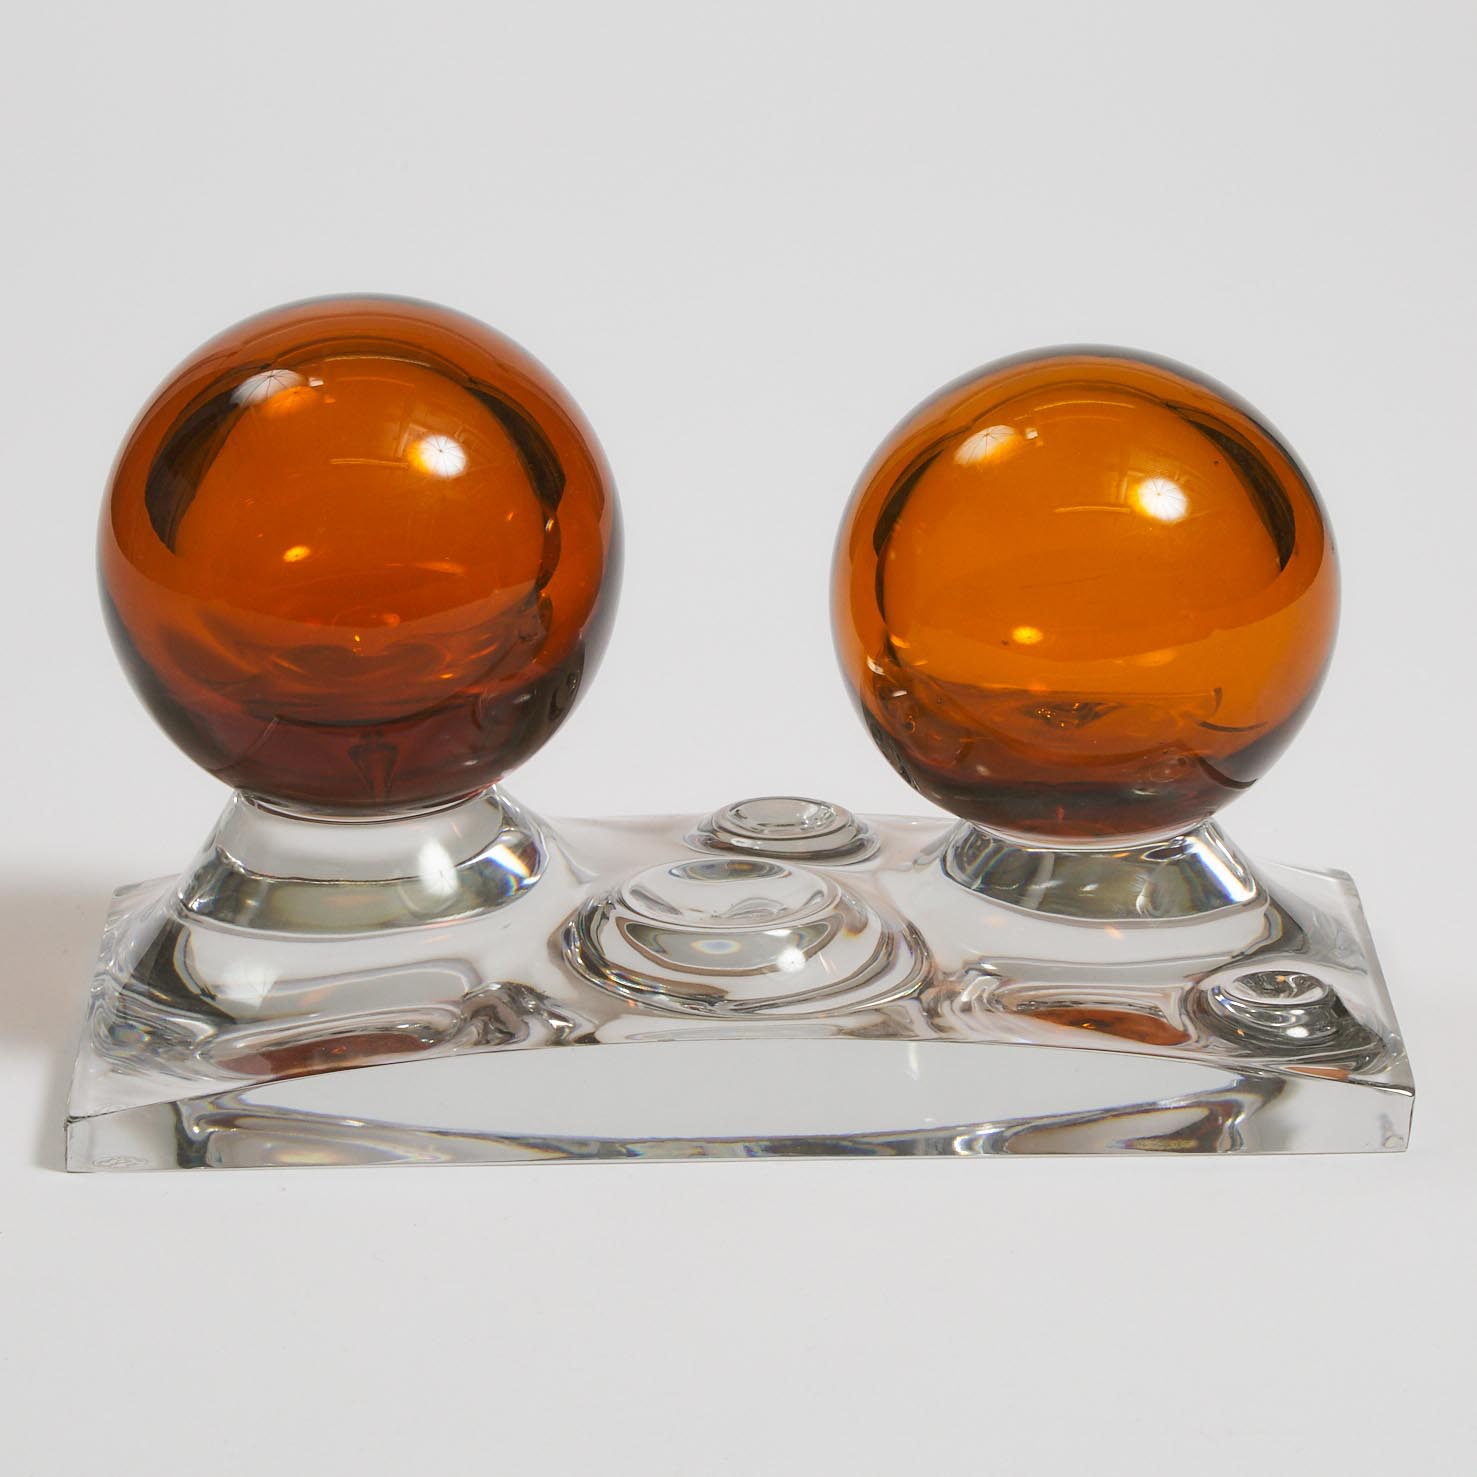 Baccarat Amber and Colourless Glass Sculpture, late 20th century